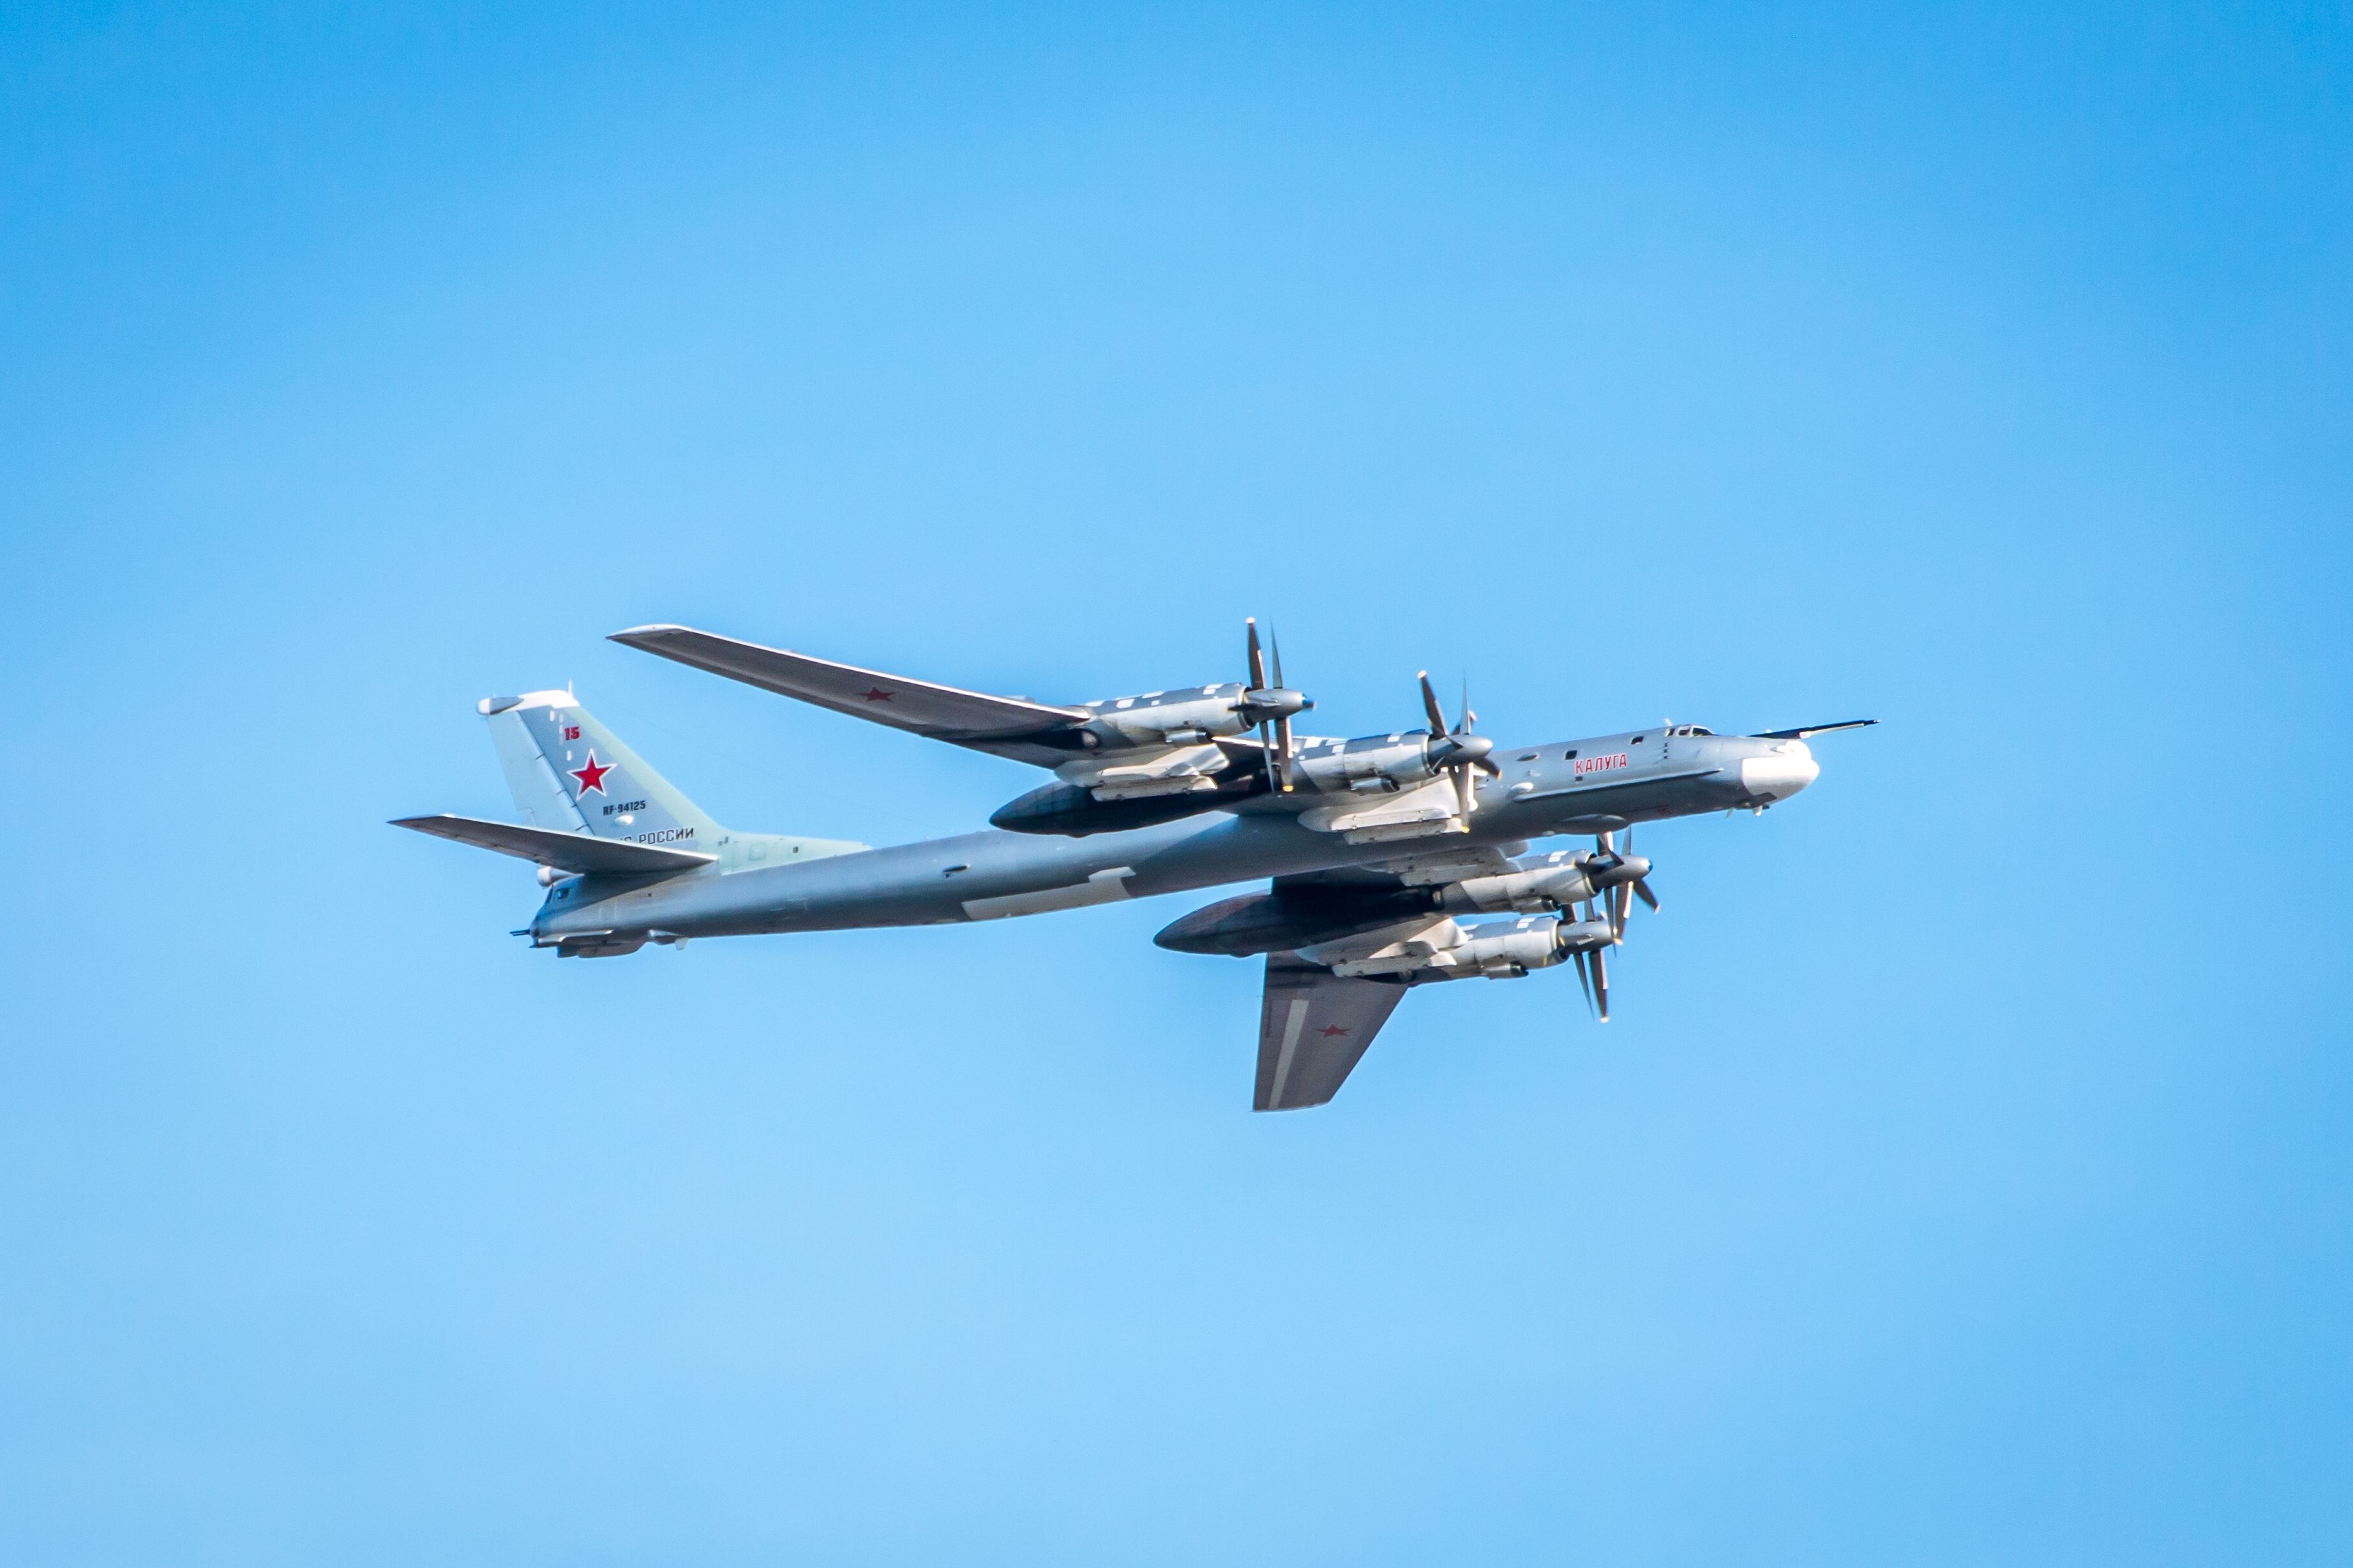 A Tupolev Tu-95 flying in the sky.